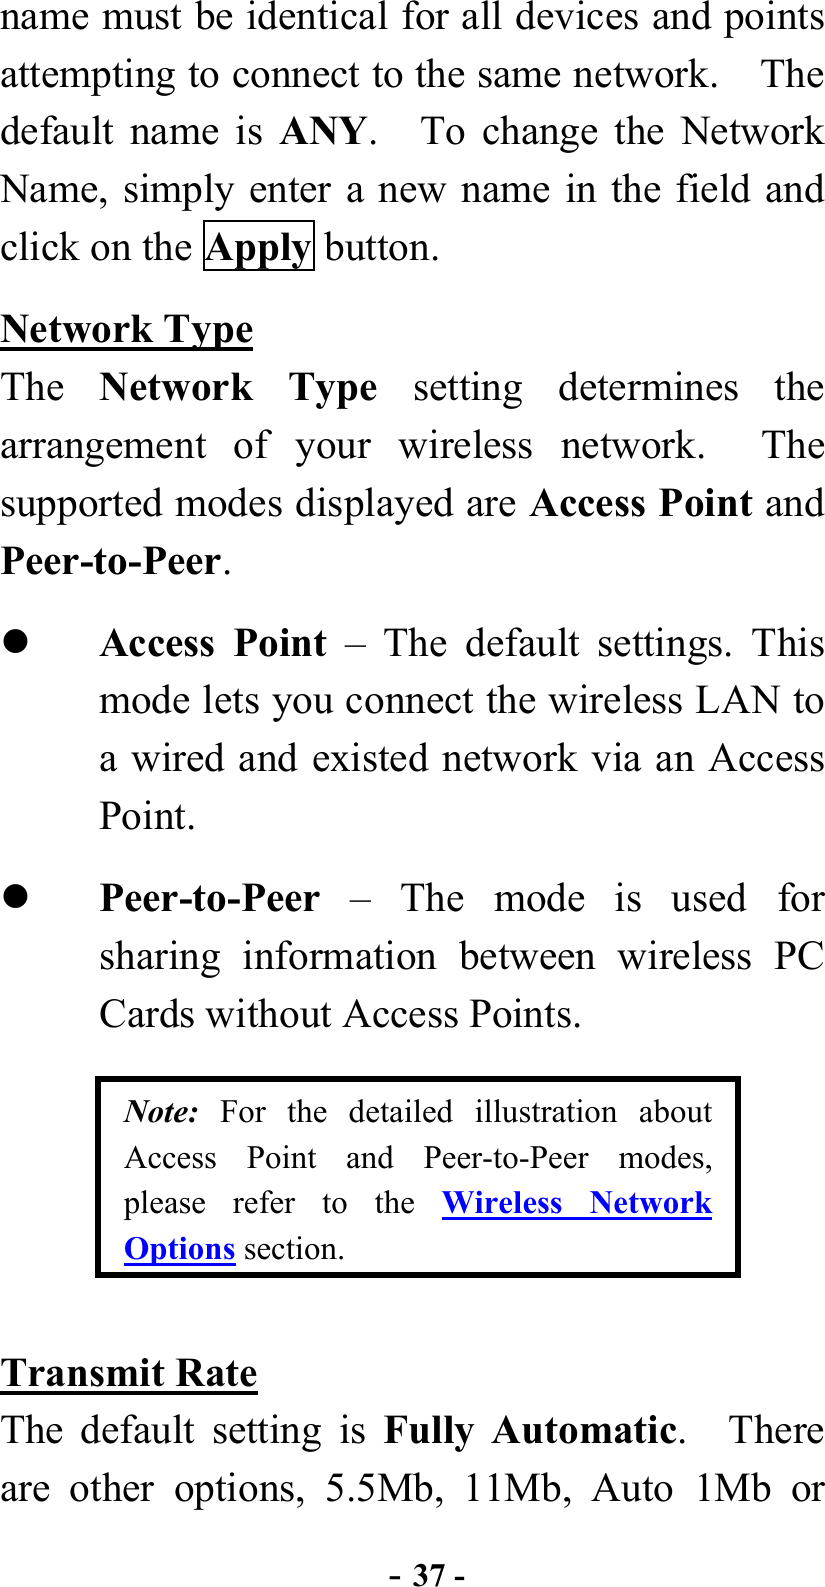  - 37 - name must be identical for all devices and points attempting to connect to the same network.    The default name is ANY.   To change the Network Name, simply enter a new name in the field and click on the Apply button. Network Type The  Network Type setting determines the arrangement of your wireless network.  The supported modes displayed are Access Point and Peer-to-Peer.   Access Point – The default settings. This mode lets you connect the wireless LAN to a wired and existed network via an Access Point.   Peer-to-Peer  – The mode is used for sharing information between wireless PC Cards without Access Points. Note: For the detailed illustration about Access Point and Peer-to-Peer modes, please refer to the Wireless Network Options section. Transmit Rate The default setting is Fully Automatic.  There are other options, 5.5Mb, 11Mb, Auto 1Mb or 